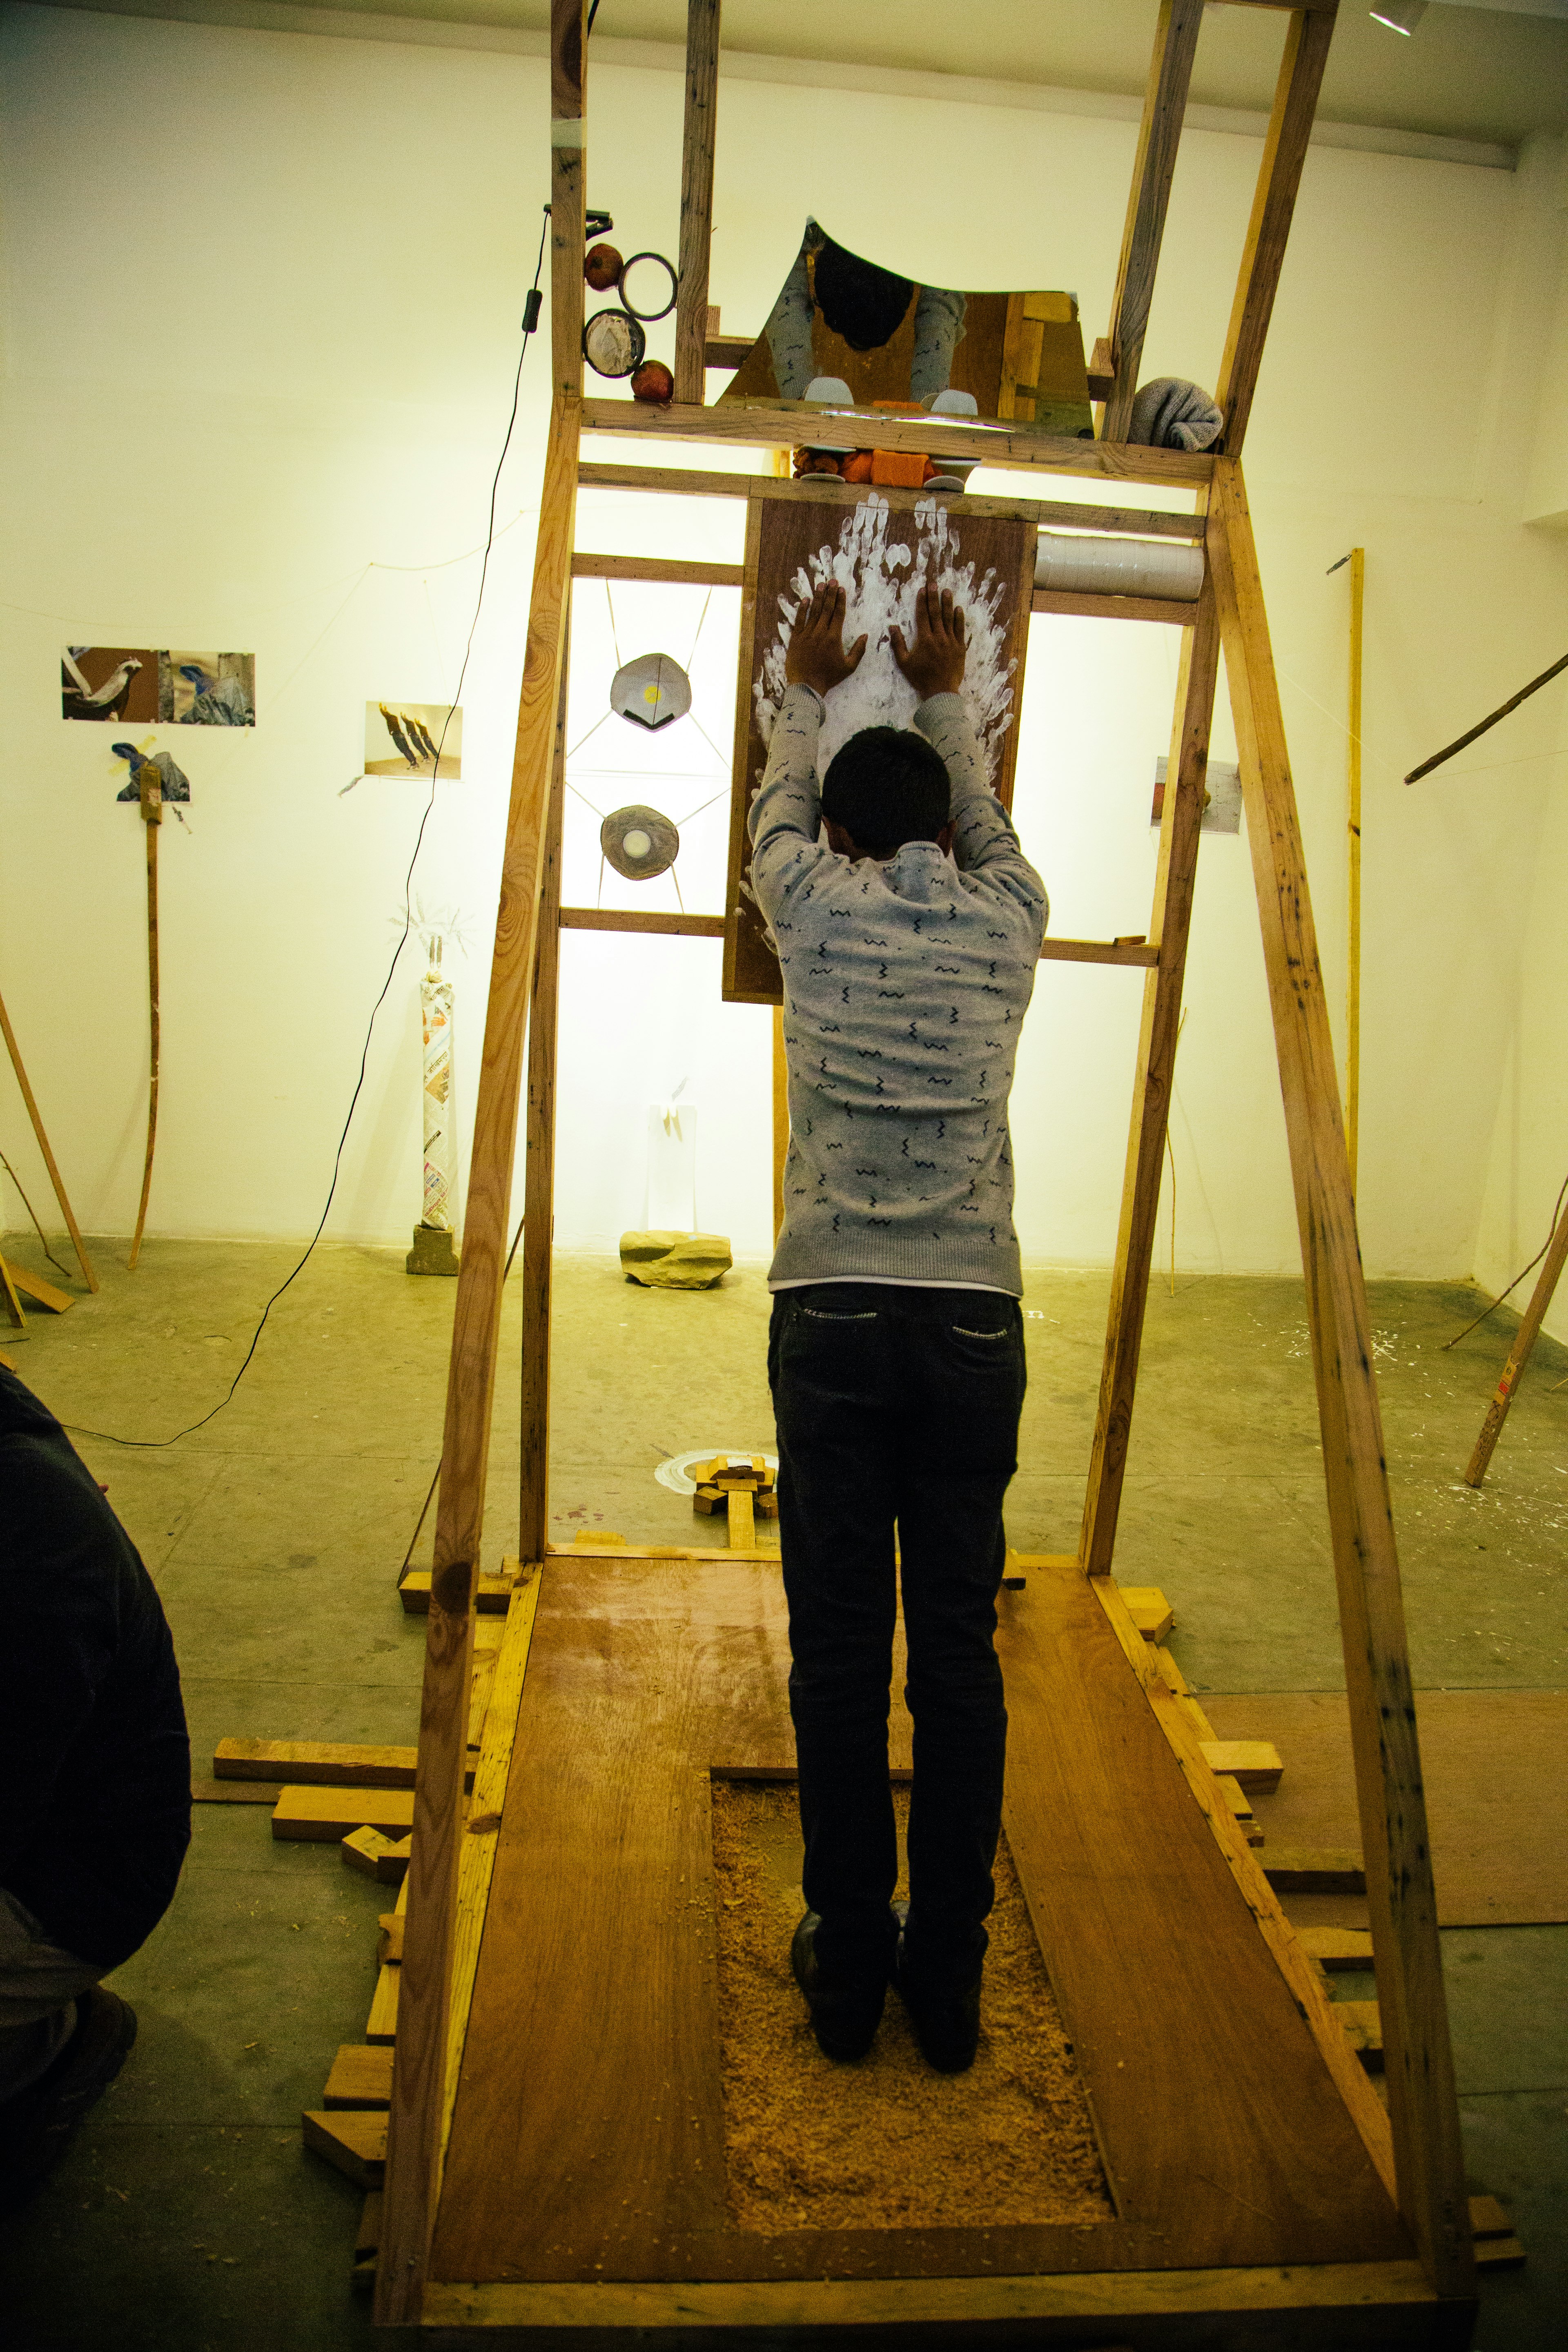 A male-presenting figure stands on a sloped wooden structure with their hands on a suspended wooden board that is painted with white handprints.